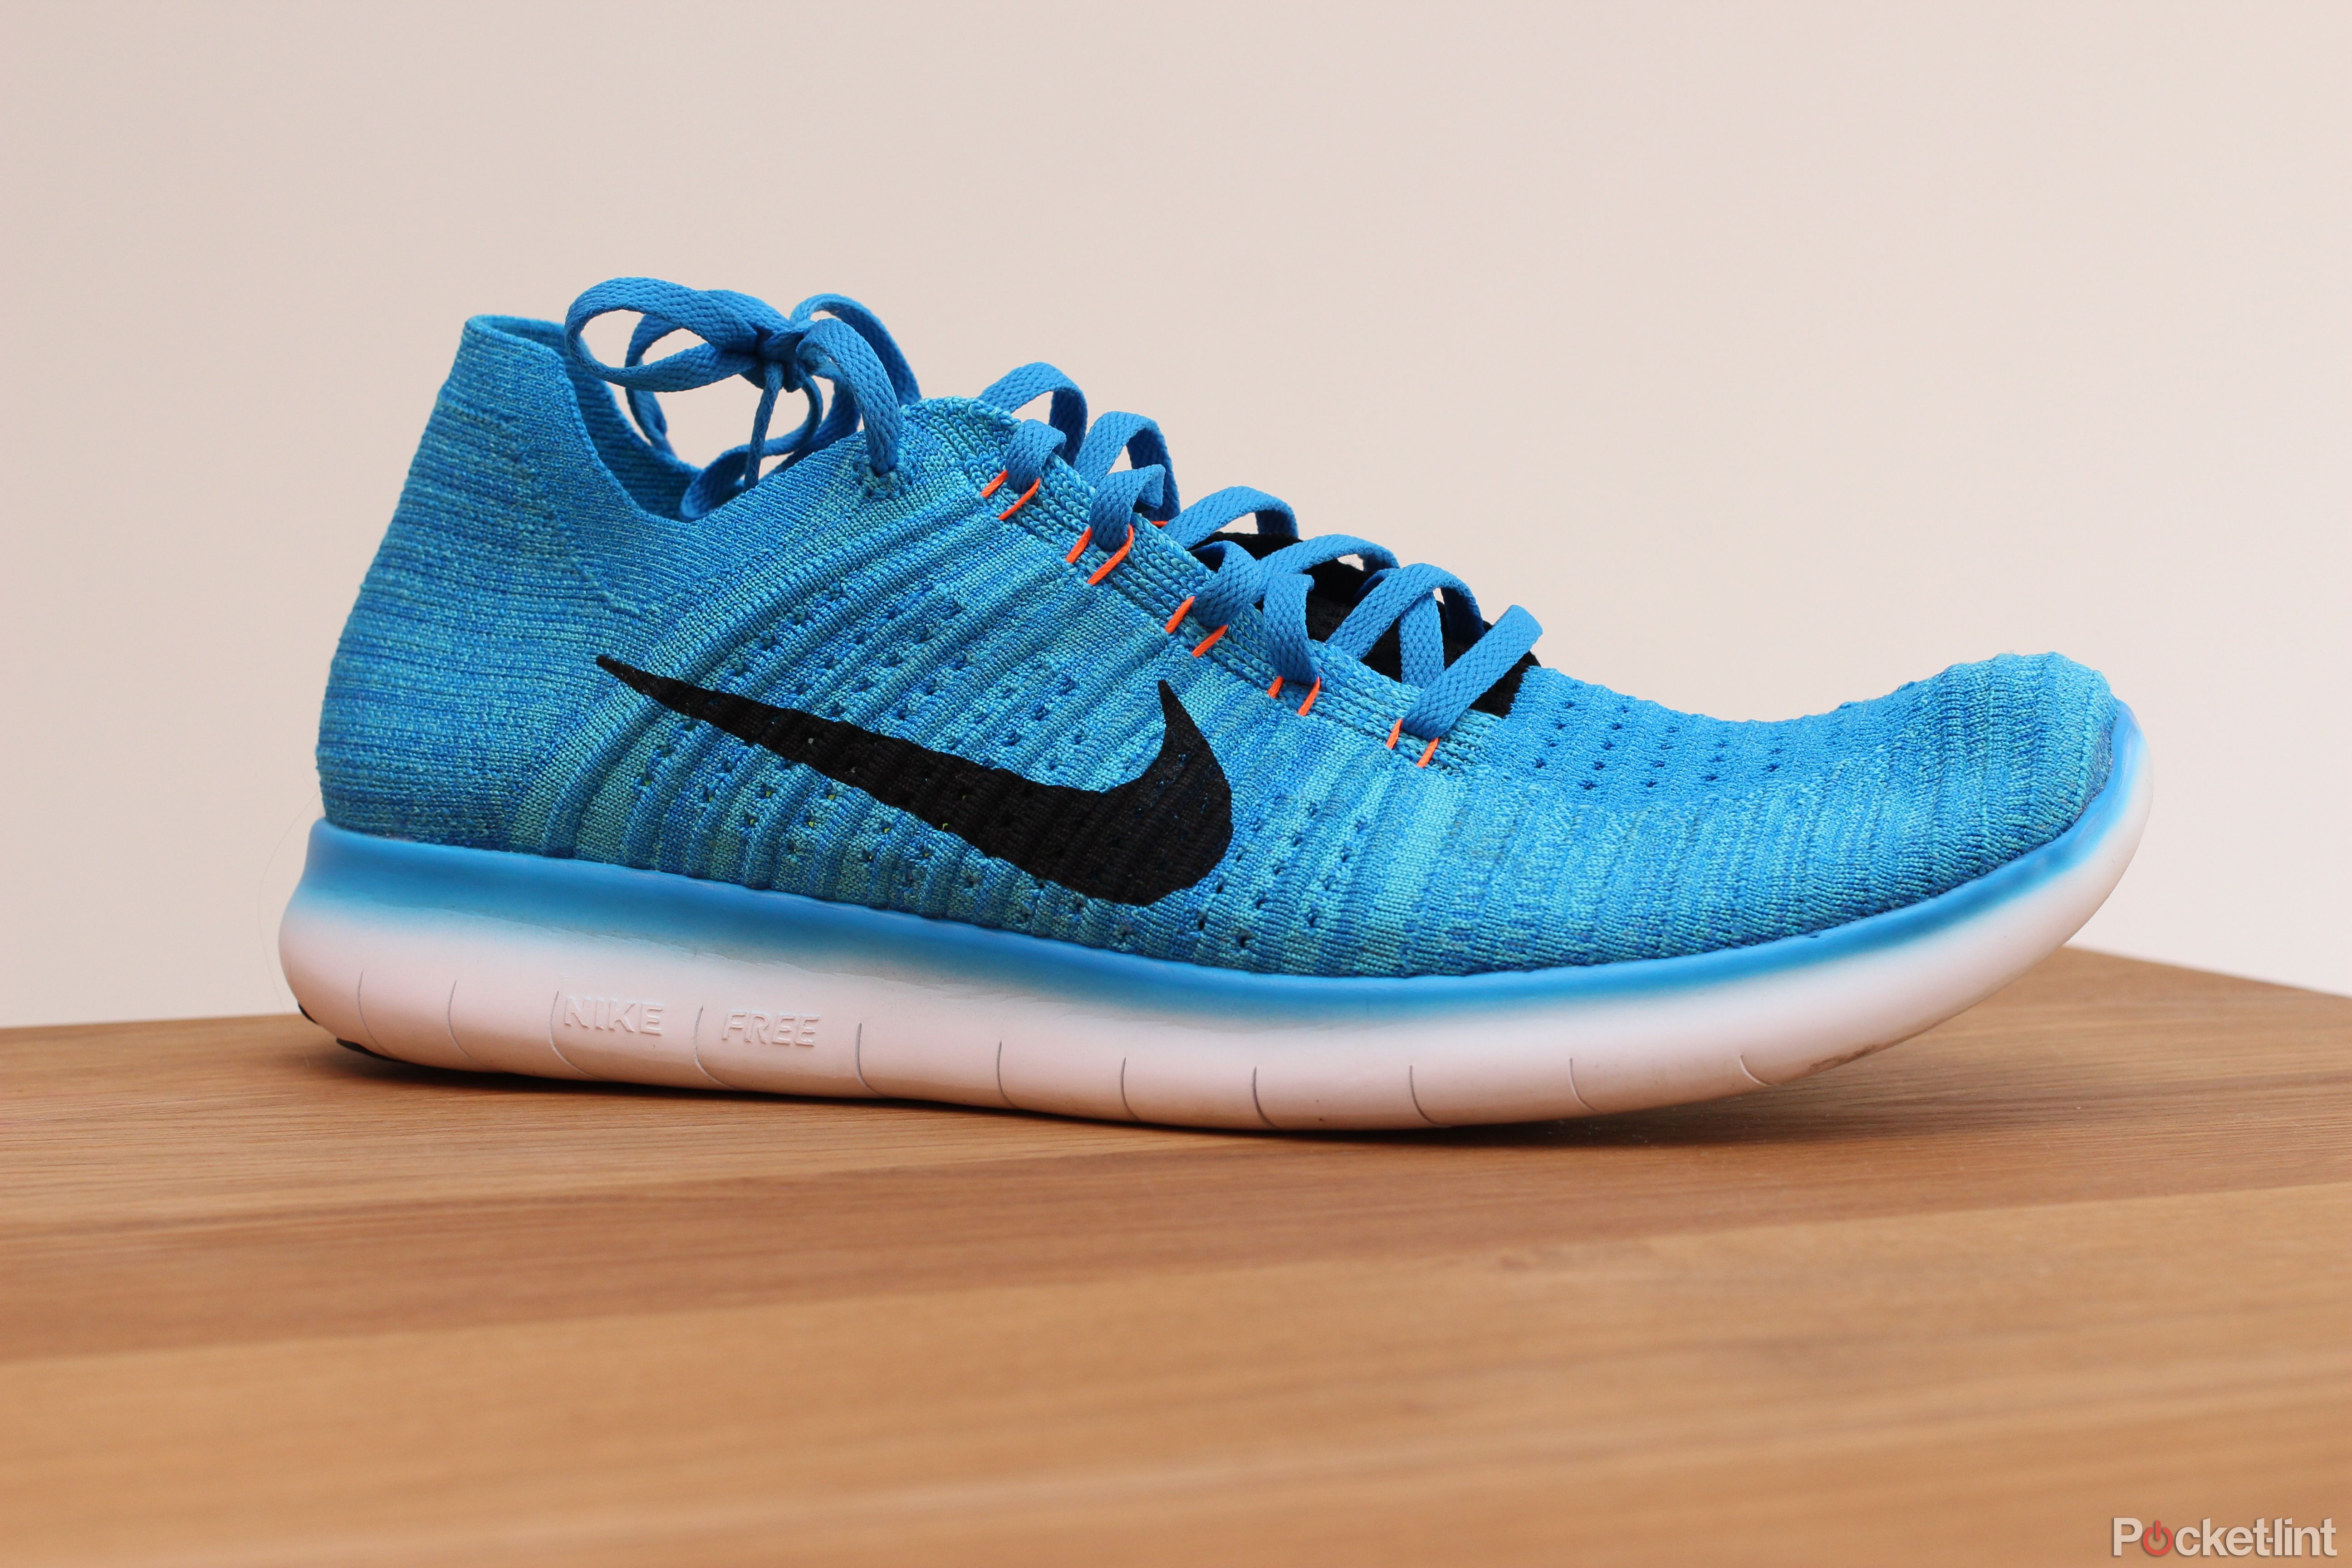 Nike Free RN Motion Flyknit sport new tech to deliver a more natural run